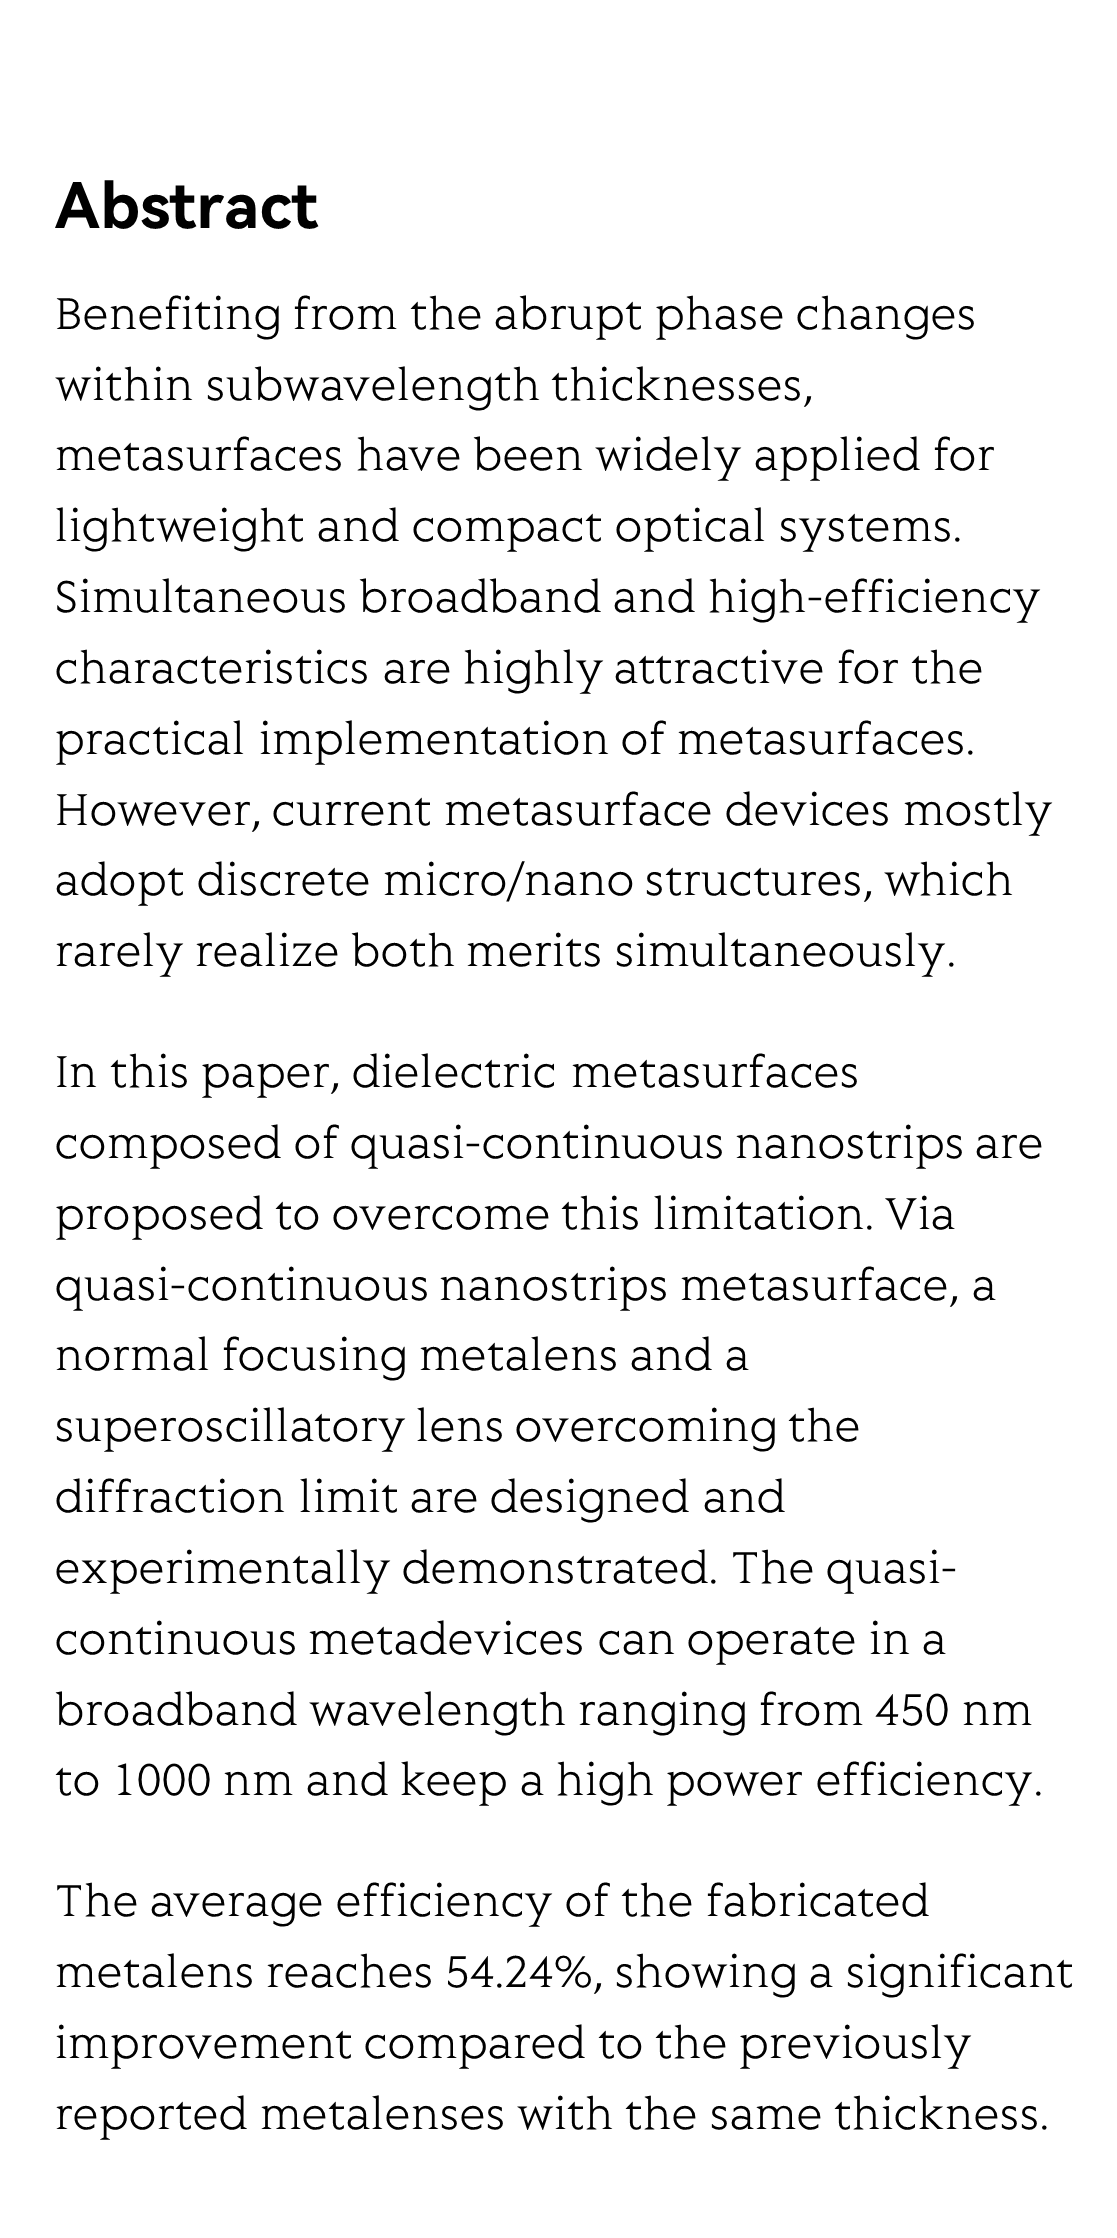 Broadband high-efficiency dielectric metalenses based on quasi-continuous nanostrips_2